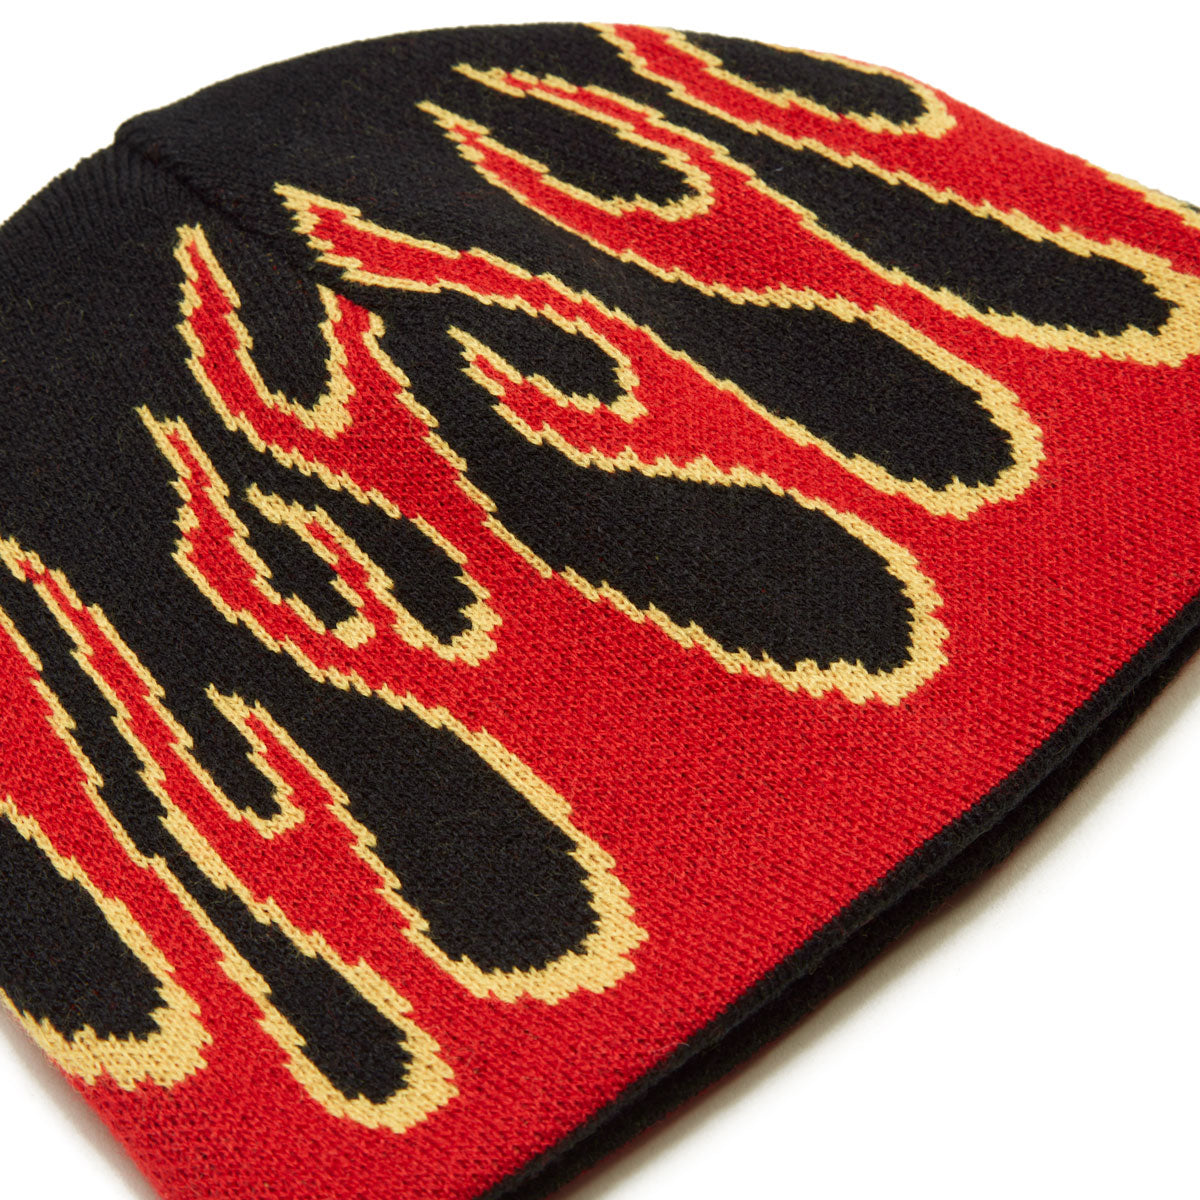 CCS Flames Reversible Skully Beanie - Black/Red image 4